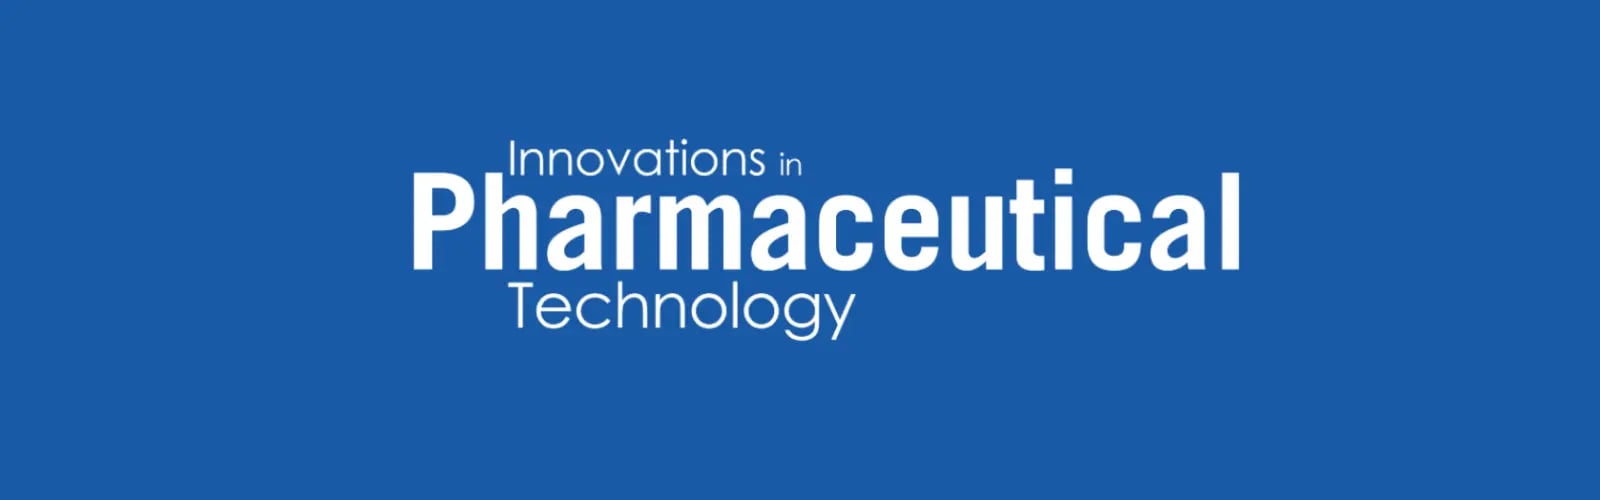 Innovations-in-Pharmaceutical-Technology